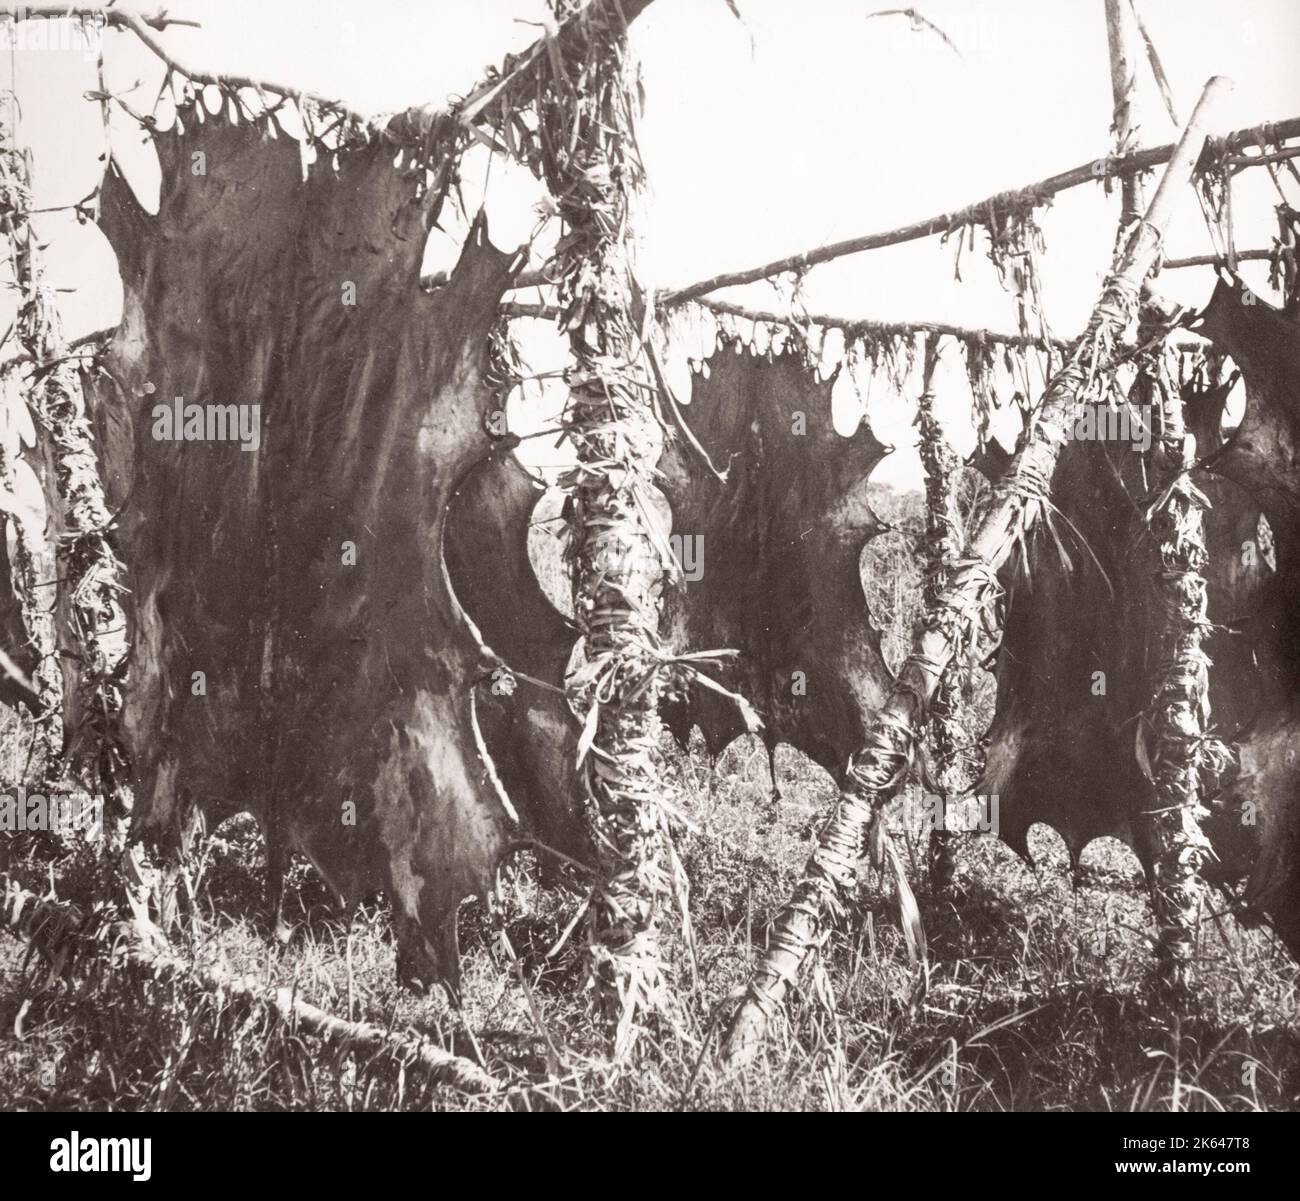 1940s East Africa - Uganda - animal hides pegged out to dry Photograph by a British army recruitment officer stationed in East Africa and the Middle East during World War II Stock Photo